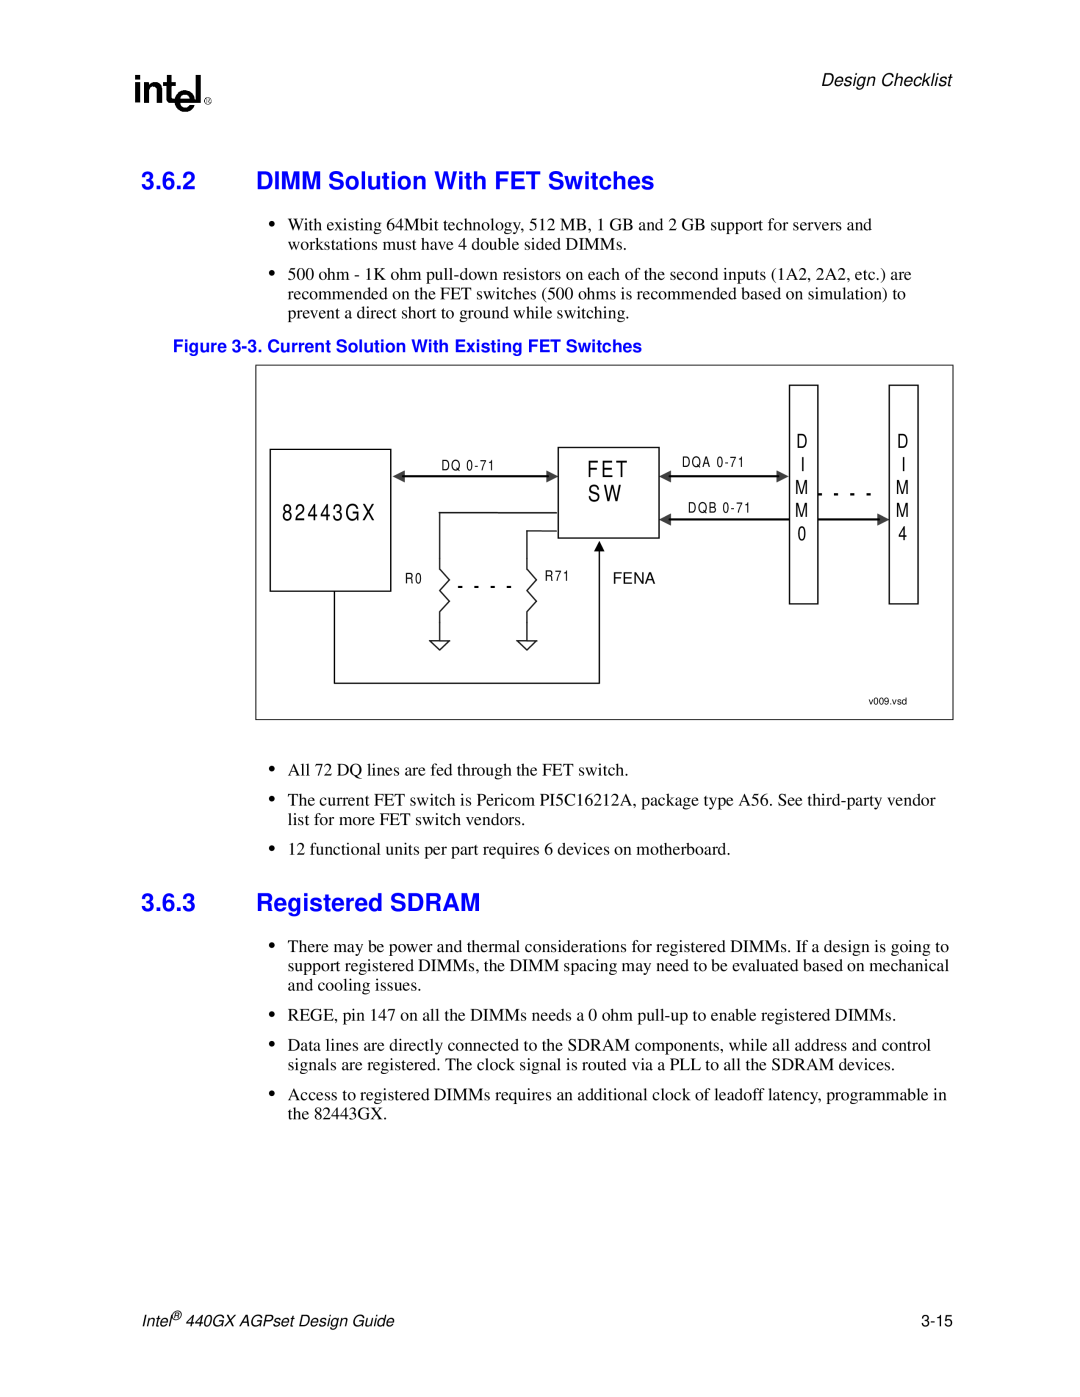 Intel 440GX manual DIMM Solution With FET Switches, Registered SDRAM, 3. Current Solution With Existing FET Switches, F E T 